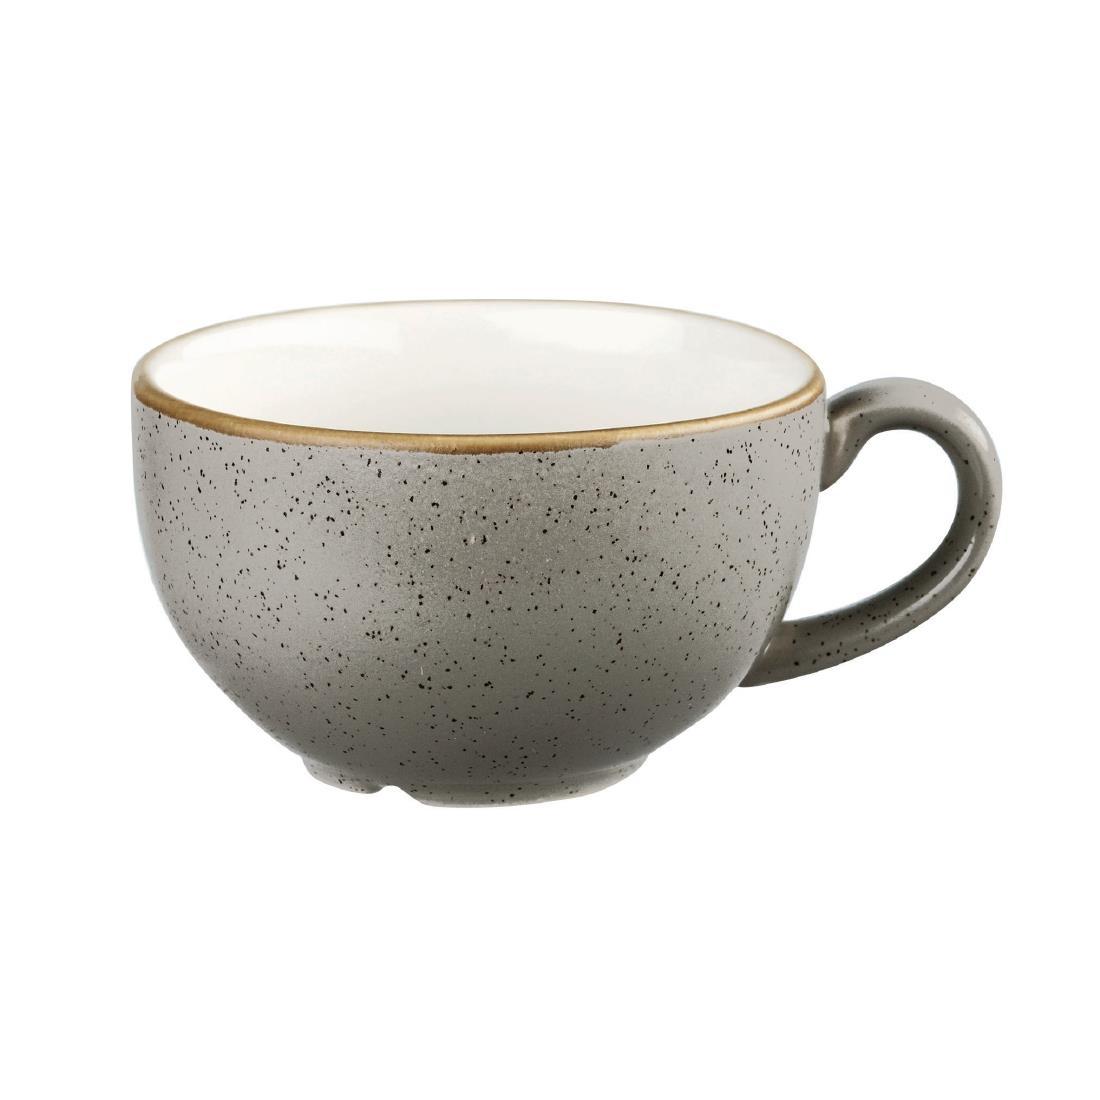 Churchill Stonecast Cappuccino Cup Peppercorn Grey 8oz (Pack of 12) - DK566  - 1